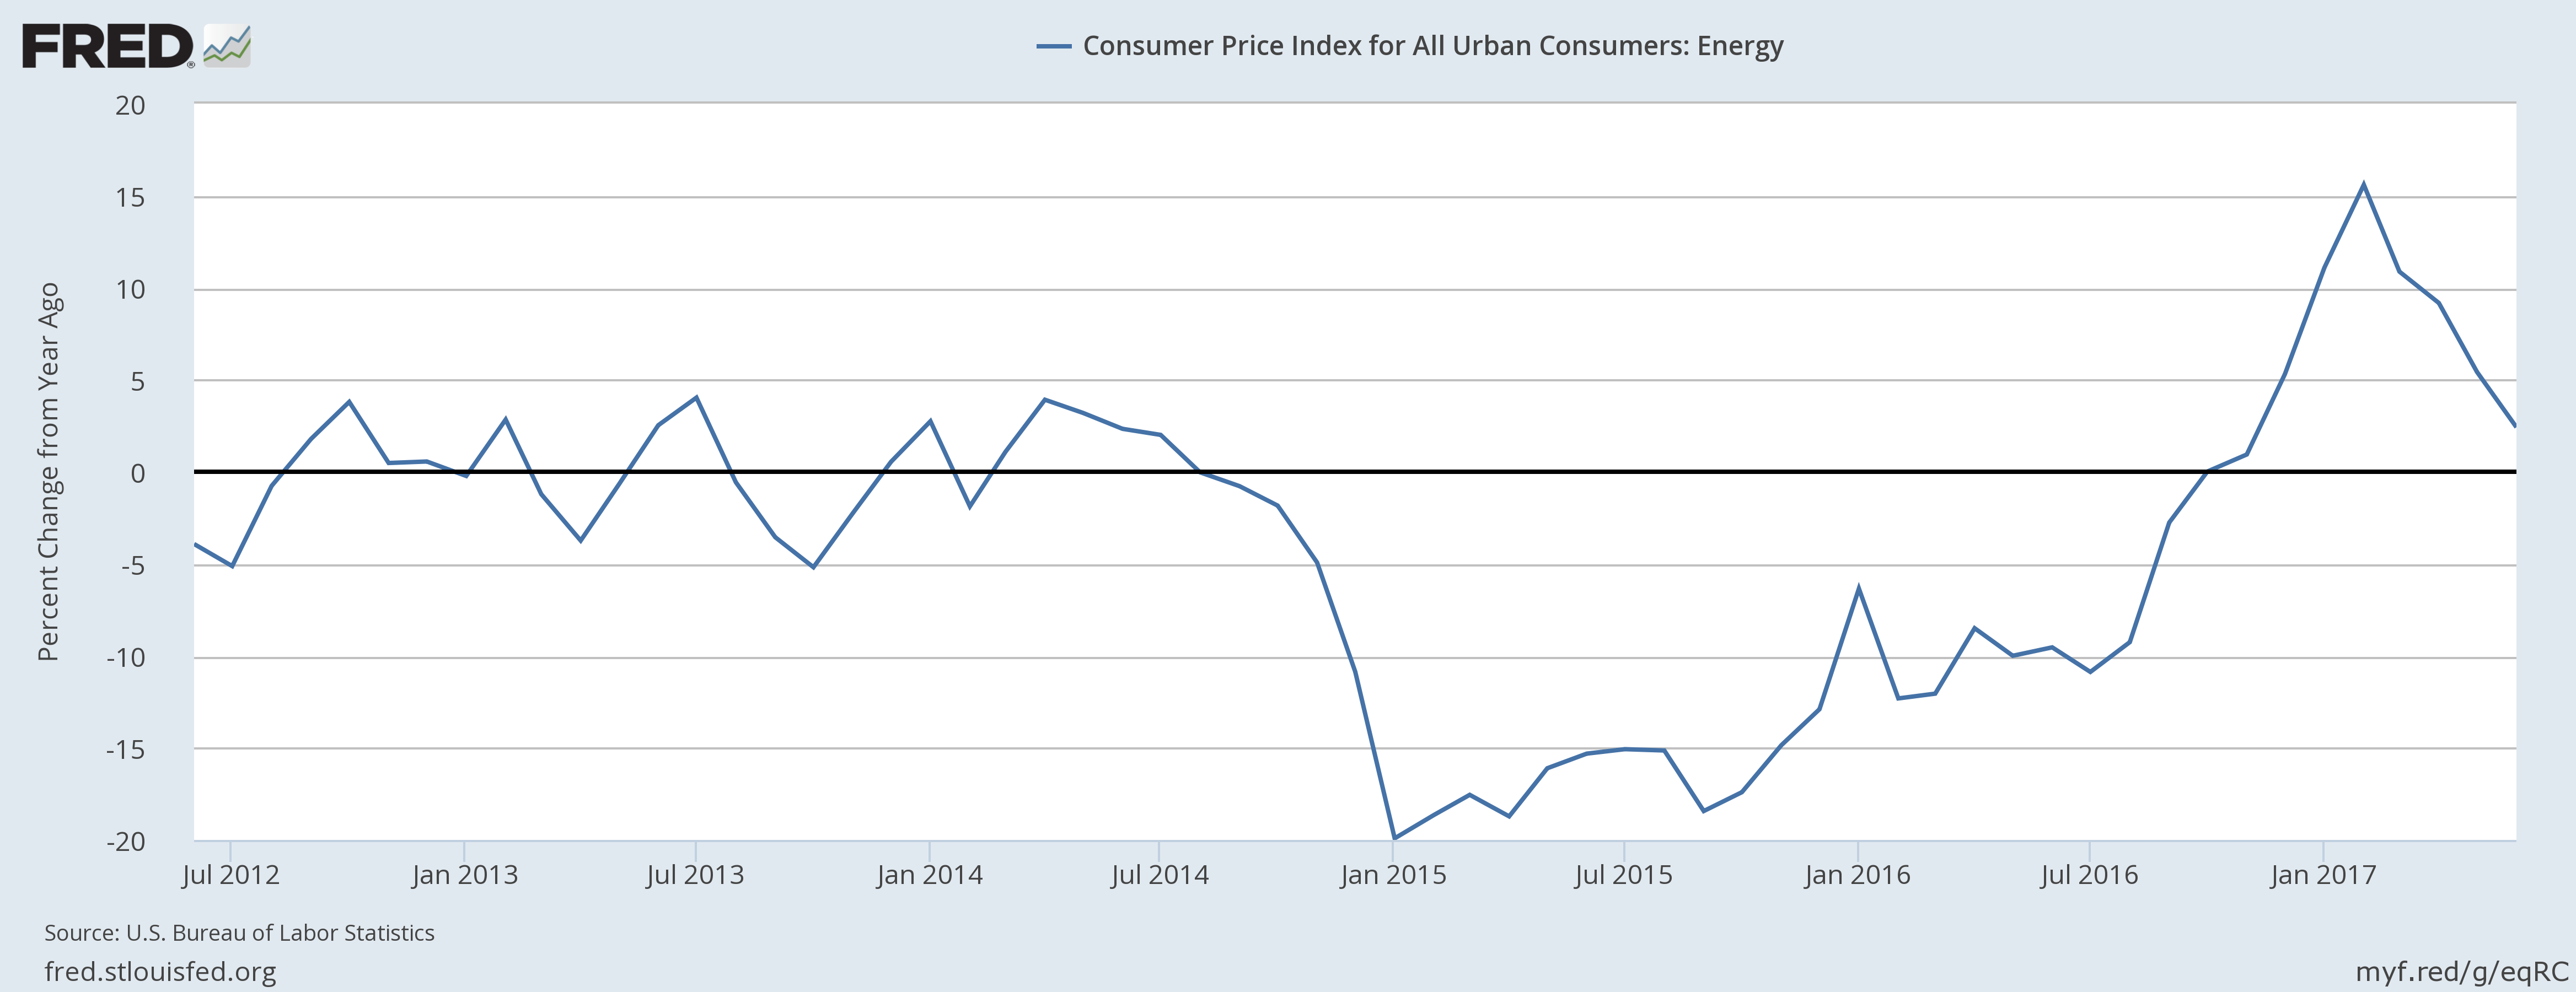 Consumer Price Index For All Urban Cosumers Energy